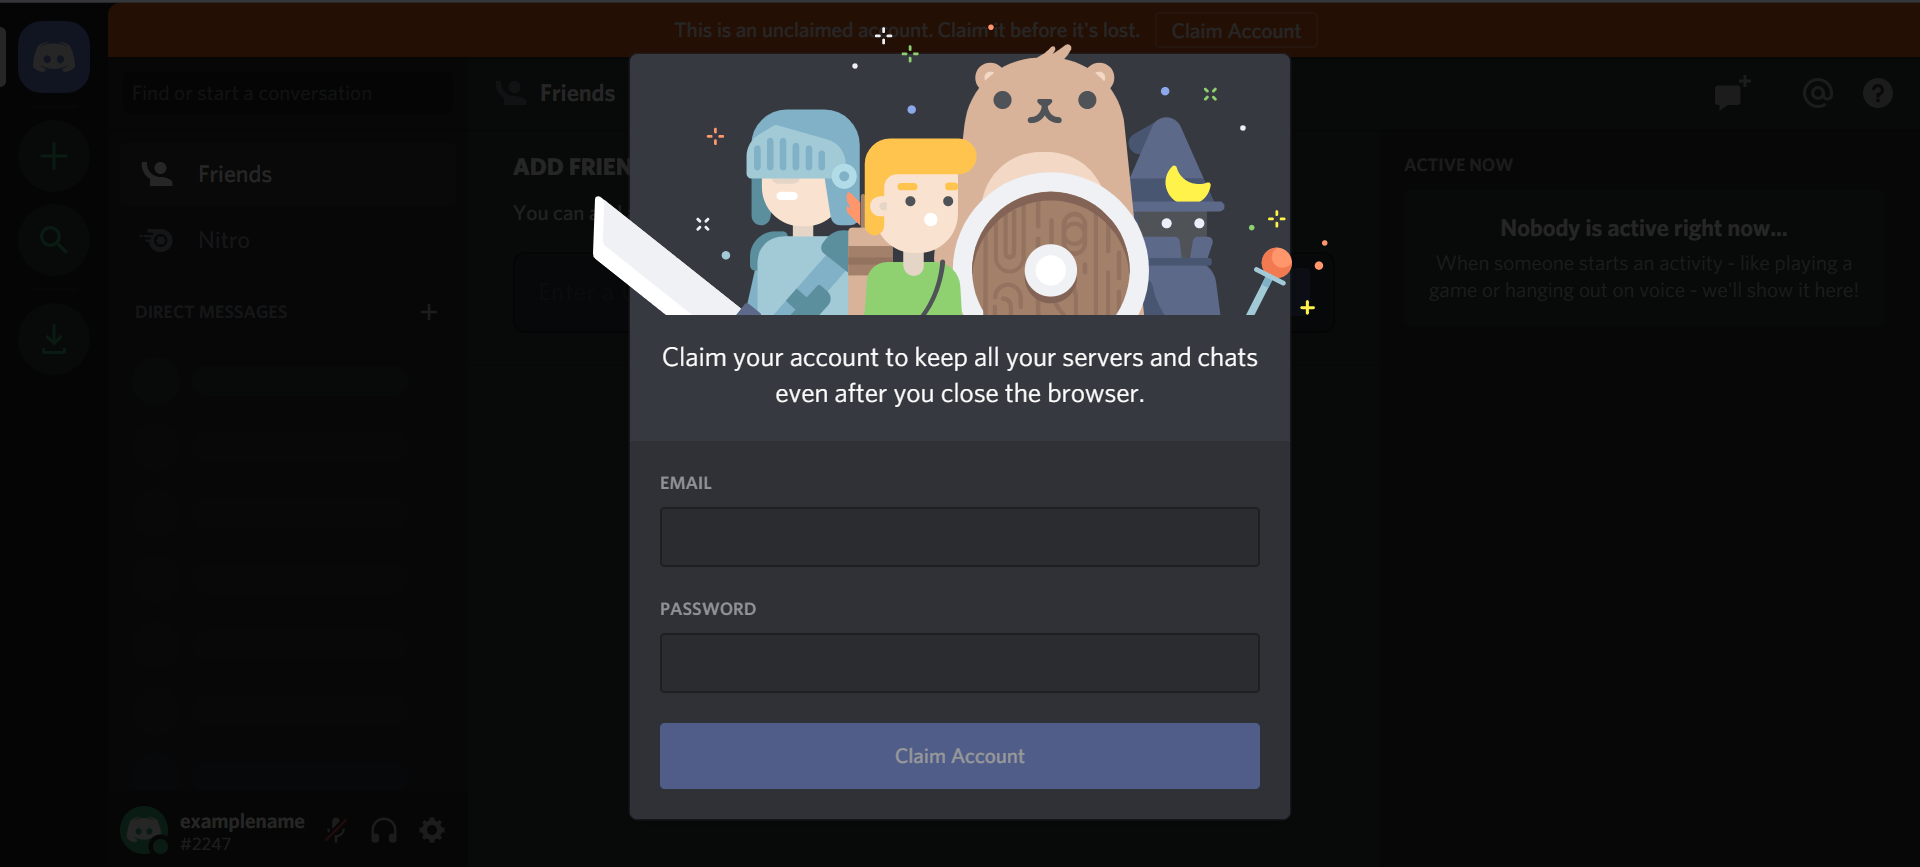 After you're done, head to the main dashboard and connect your Discord account.